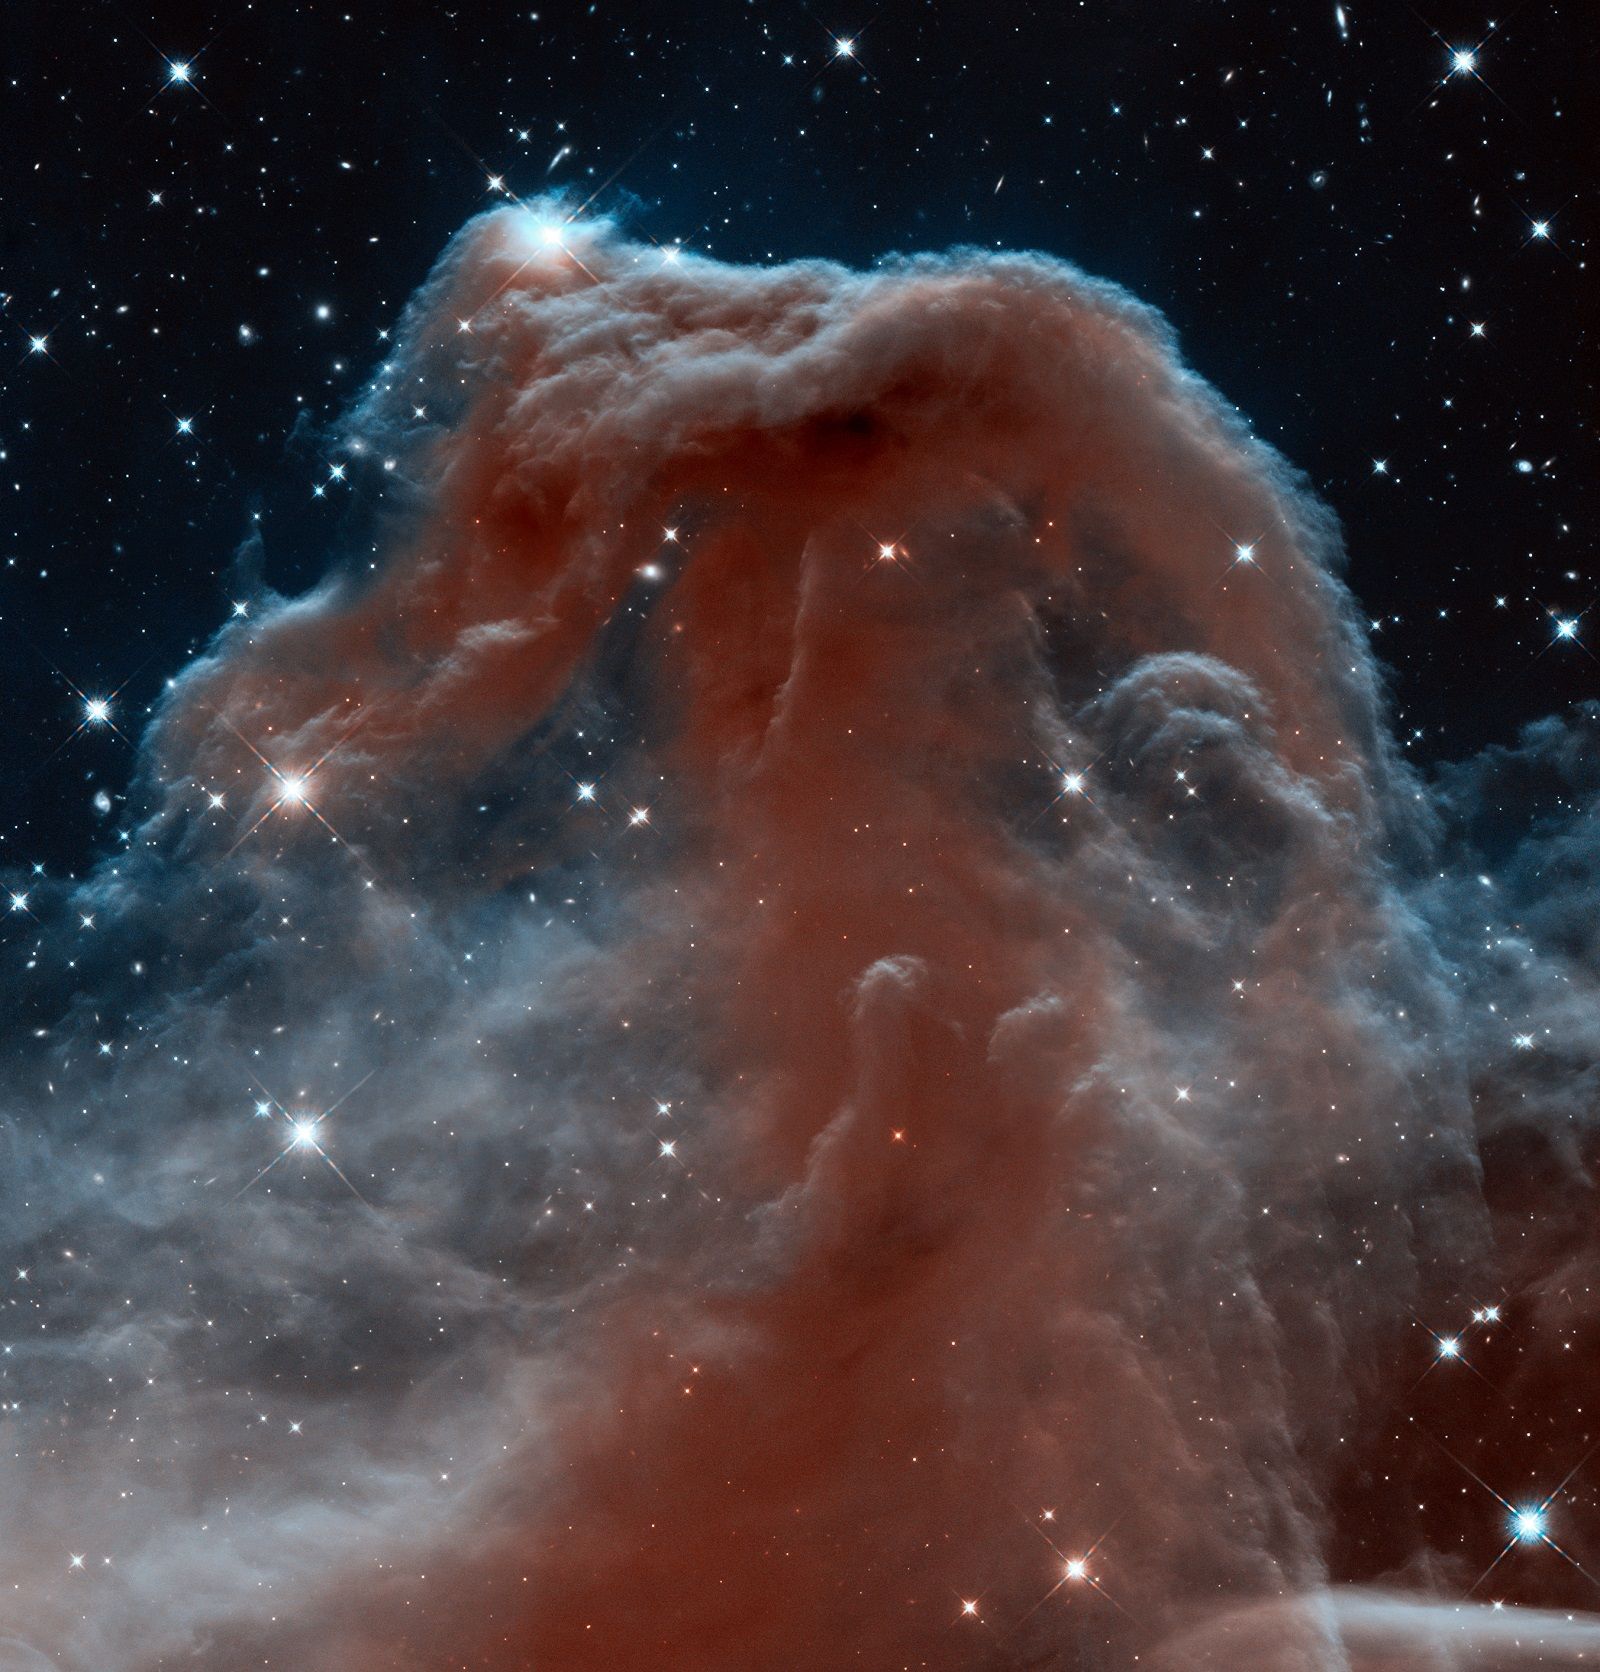 Astounding images from the depths of the Universe courtesy of the Hubble Space Telescope image 8